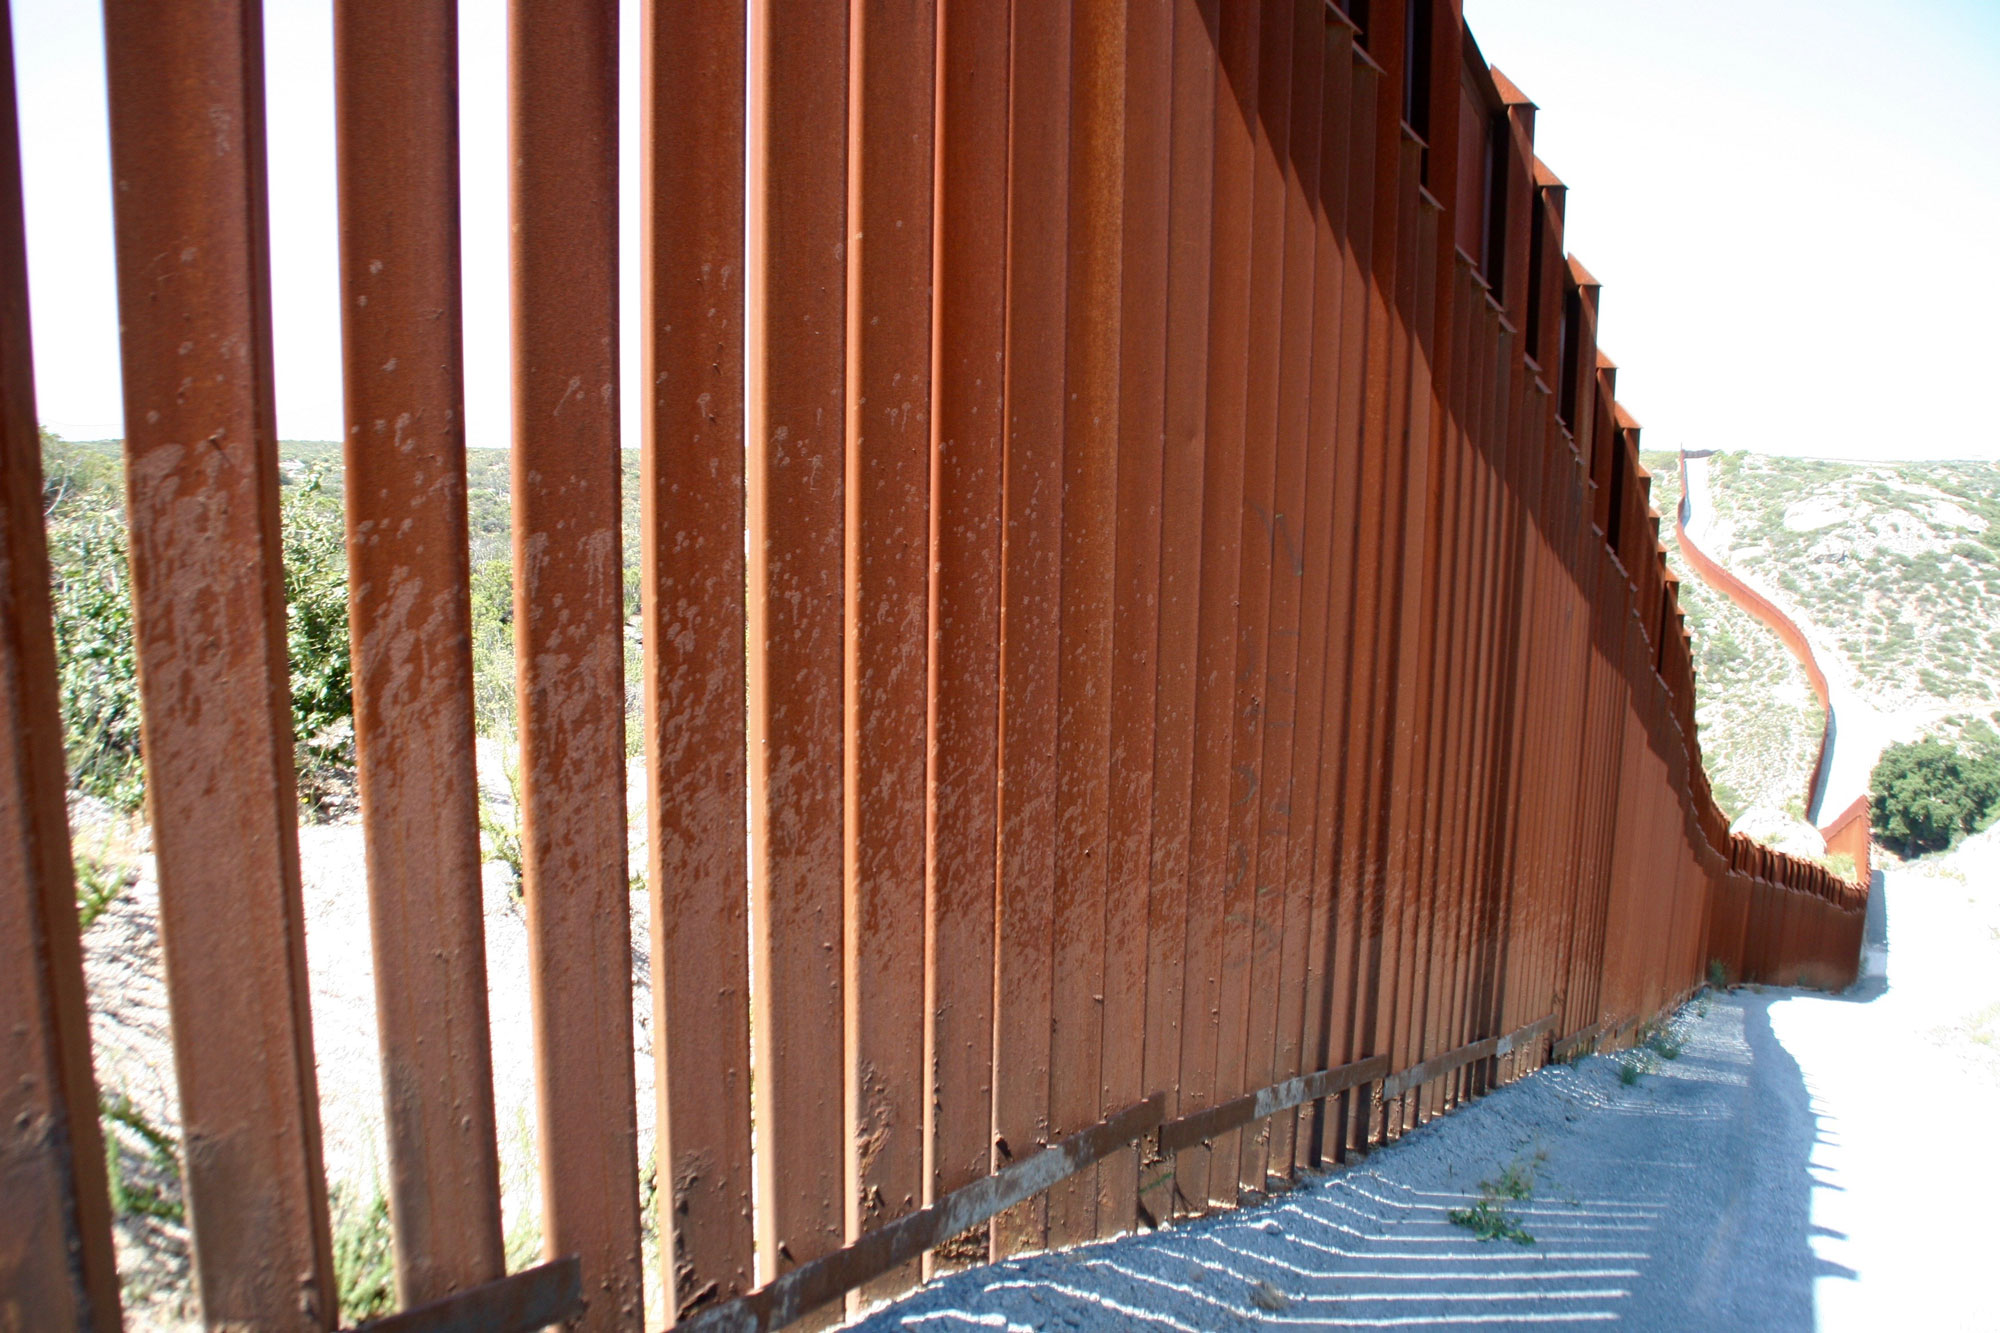 United States Charged with Human Rights Abuses for Border Patrol Slayings